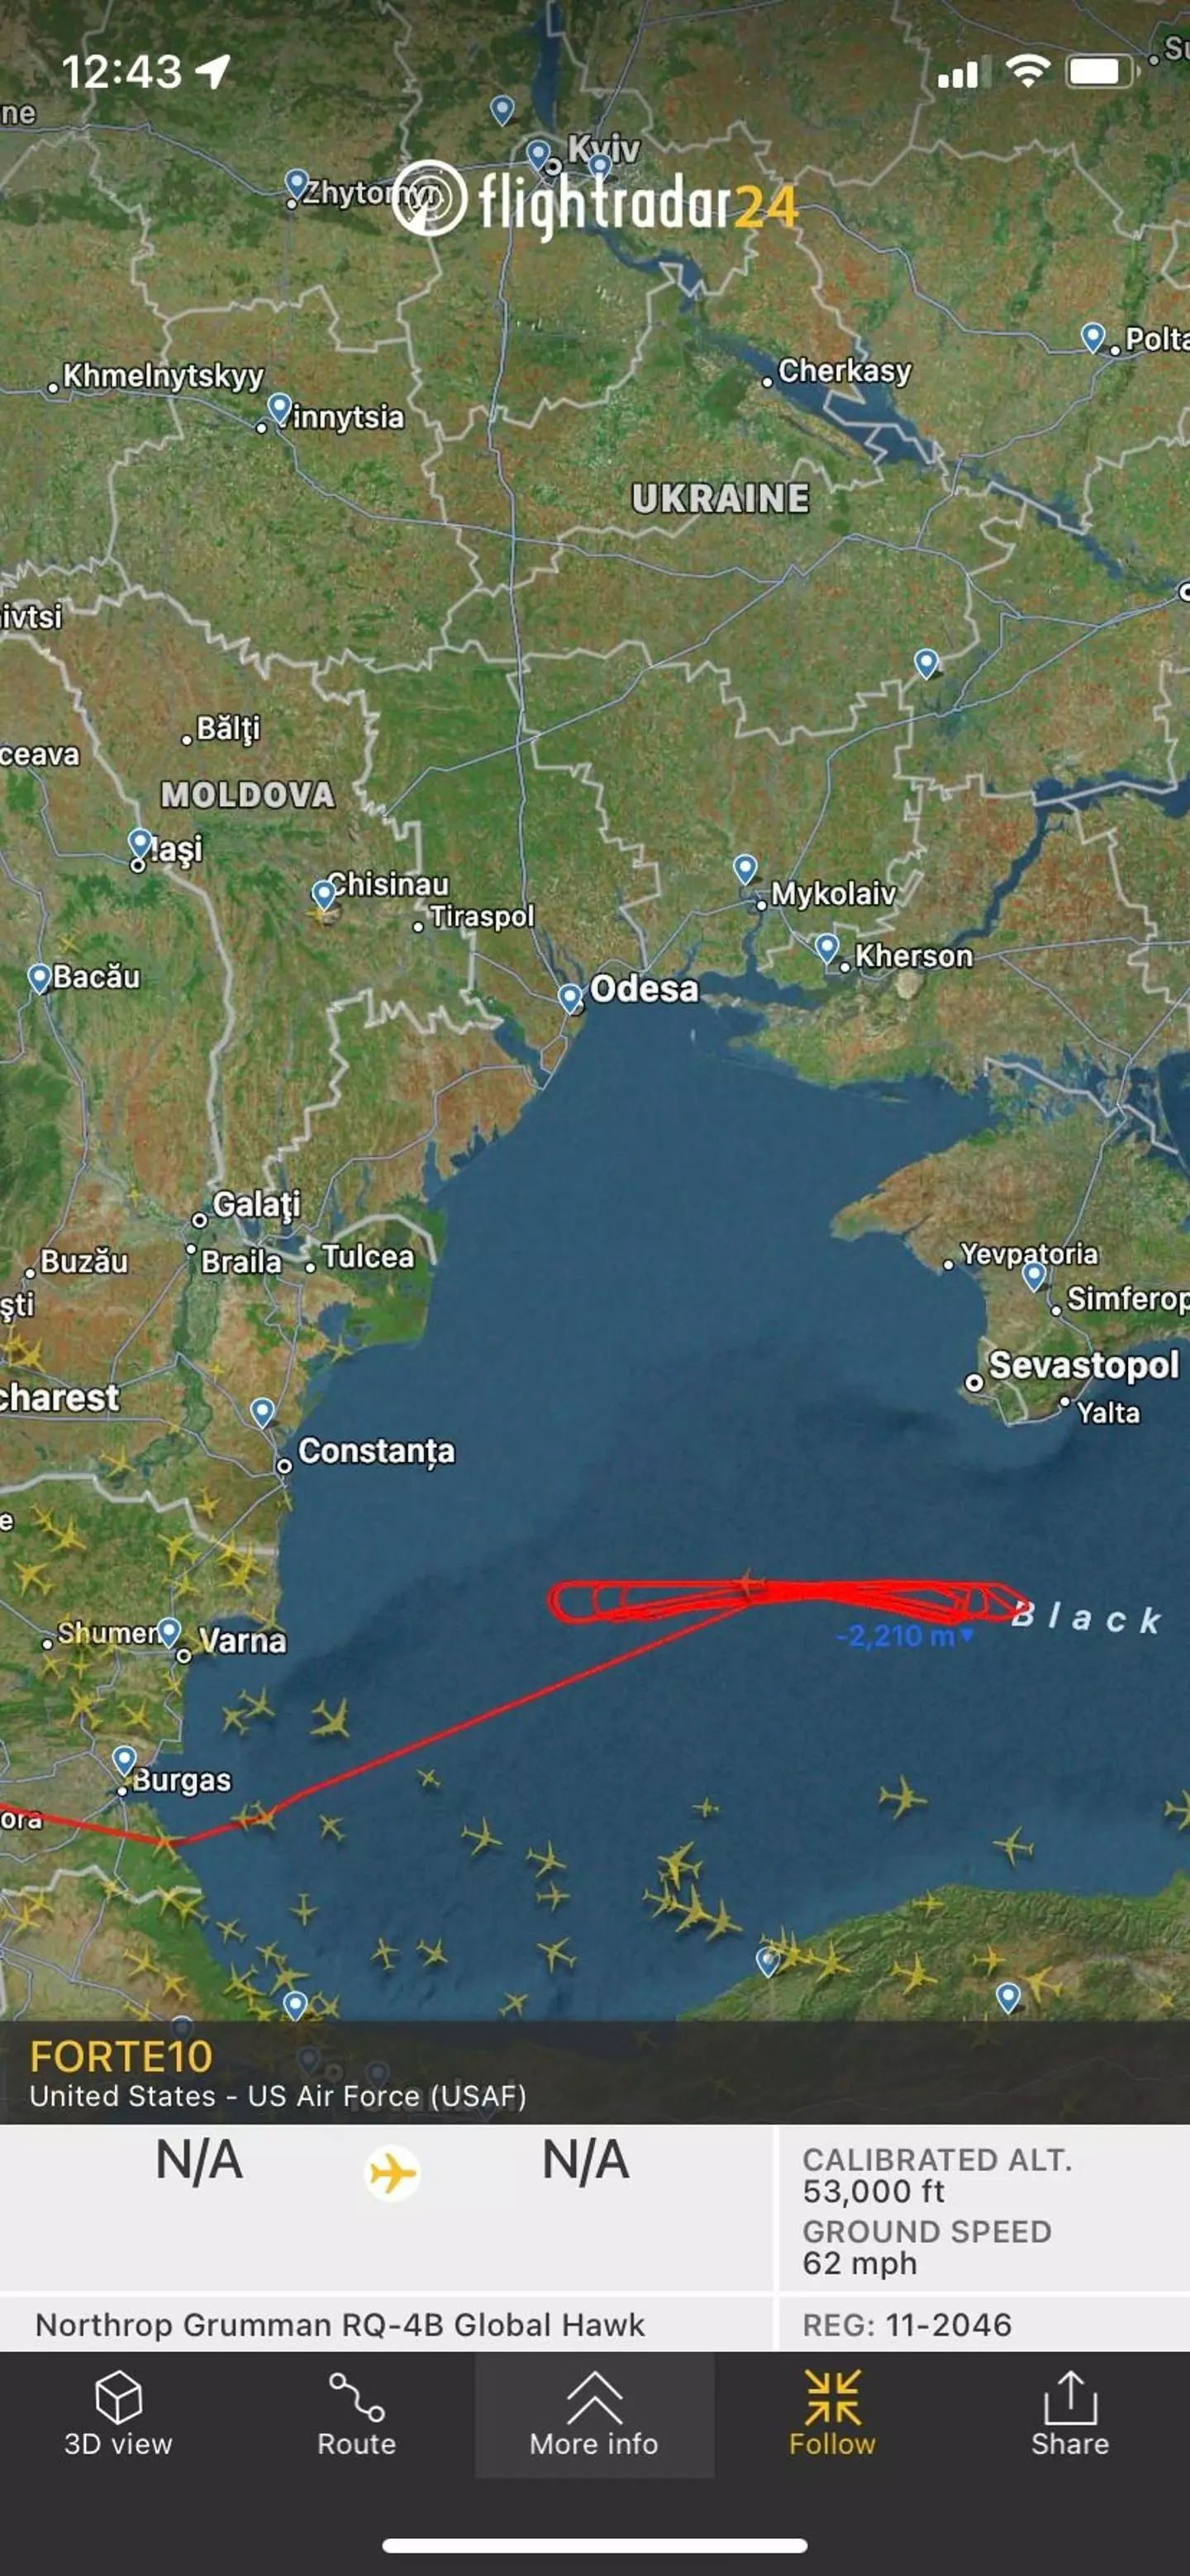 The flight path shows the aircraft as hovering by Ukraine for hours.